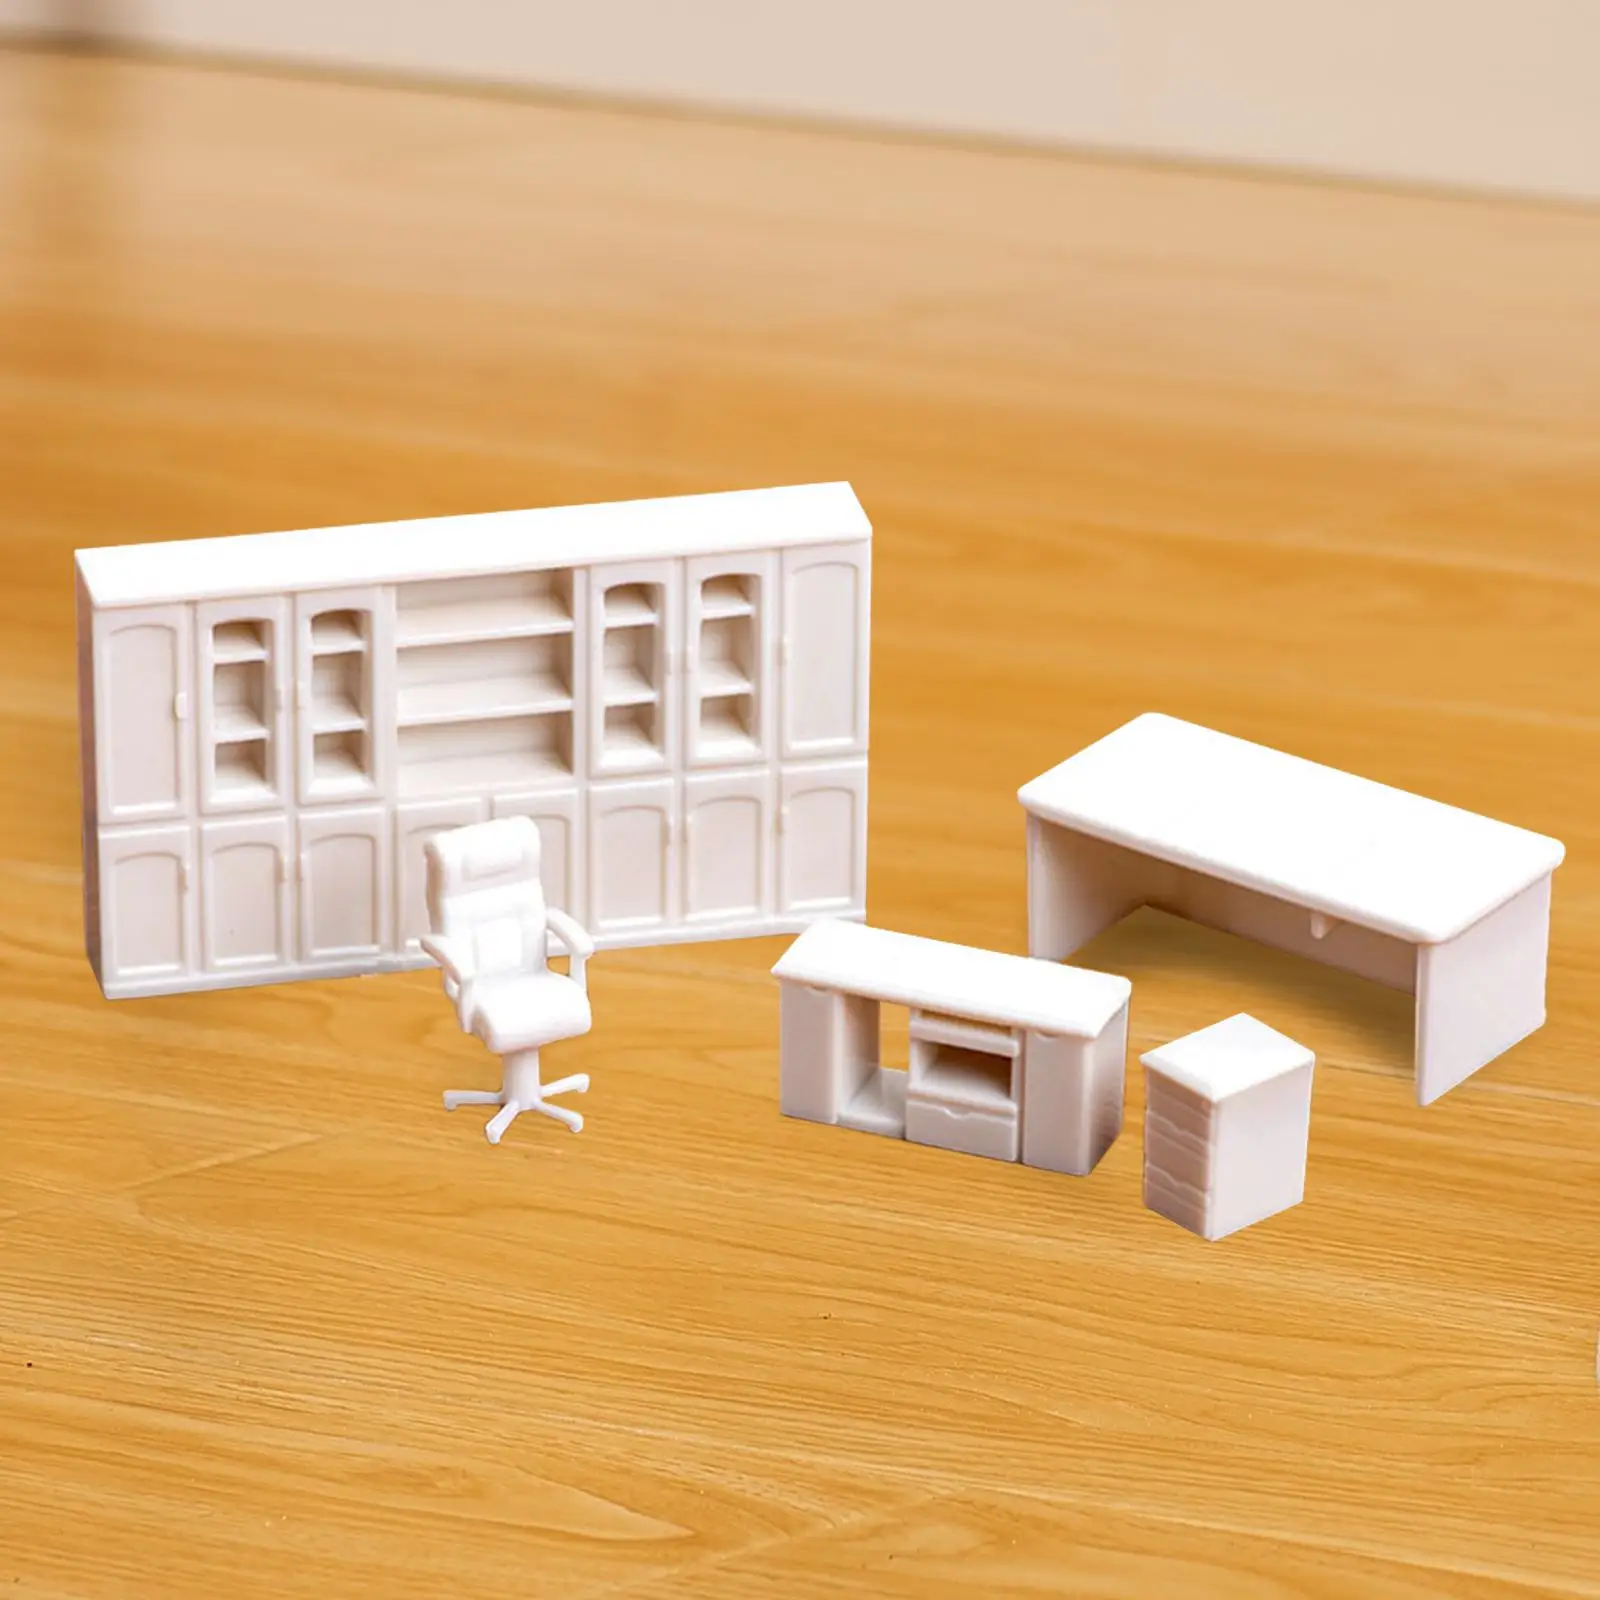 1/50 Scale Furniture Model Realistic 1:50 Scale Miniature Furniture for Dollhouse Decor Photography Props Sand Table Decoration